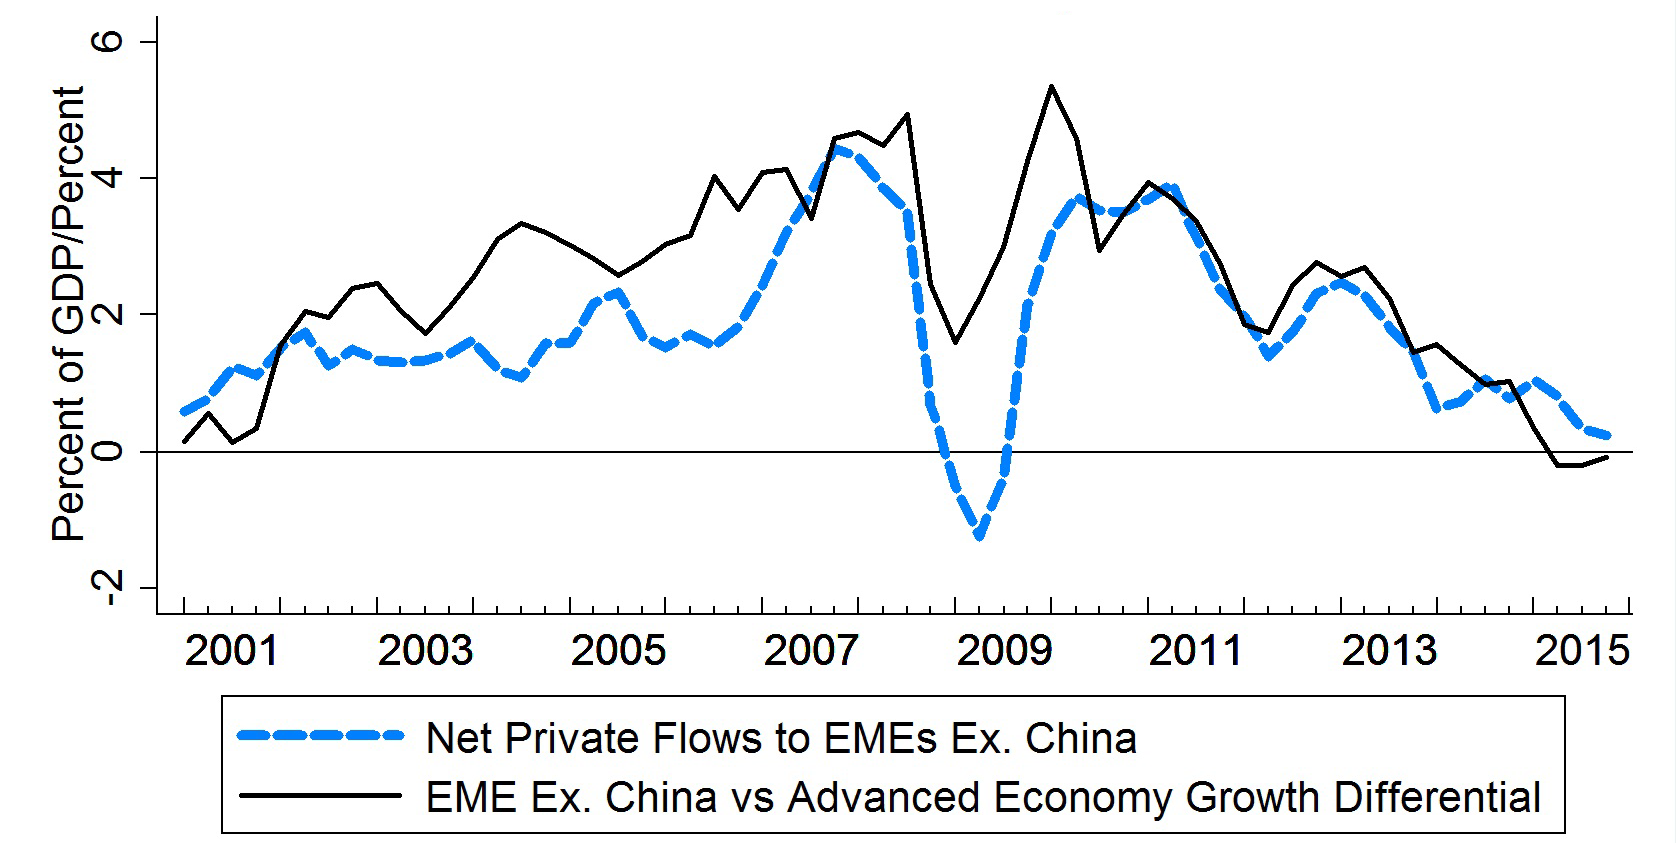 Chart 9: Net Private Flows and Emerging vs Advanced Economy Growth Differential. See accessible link for data.